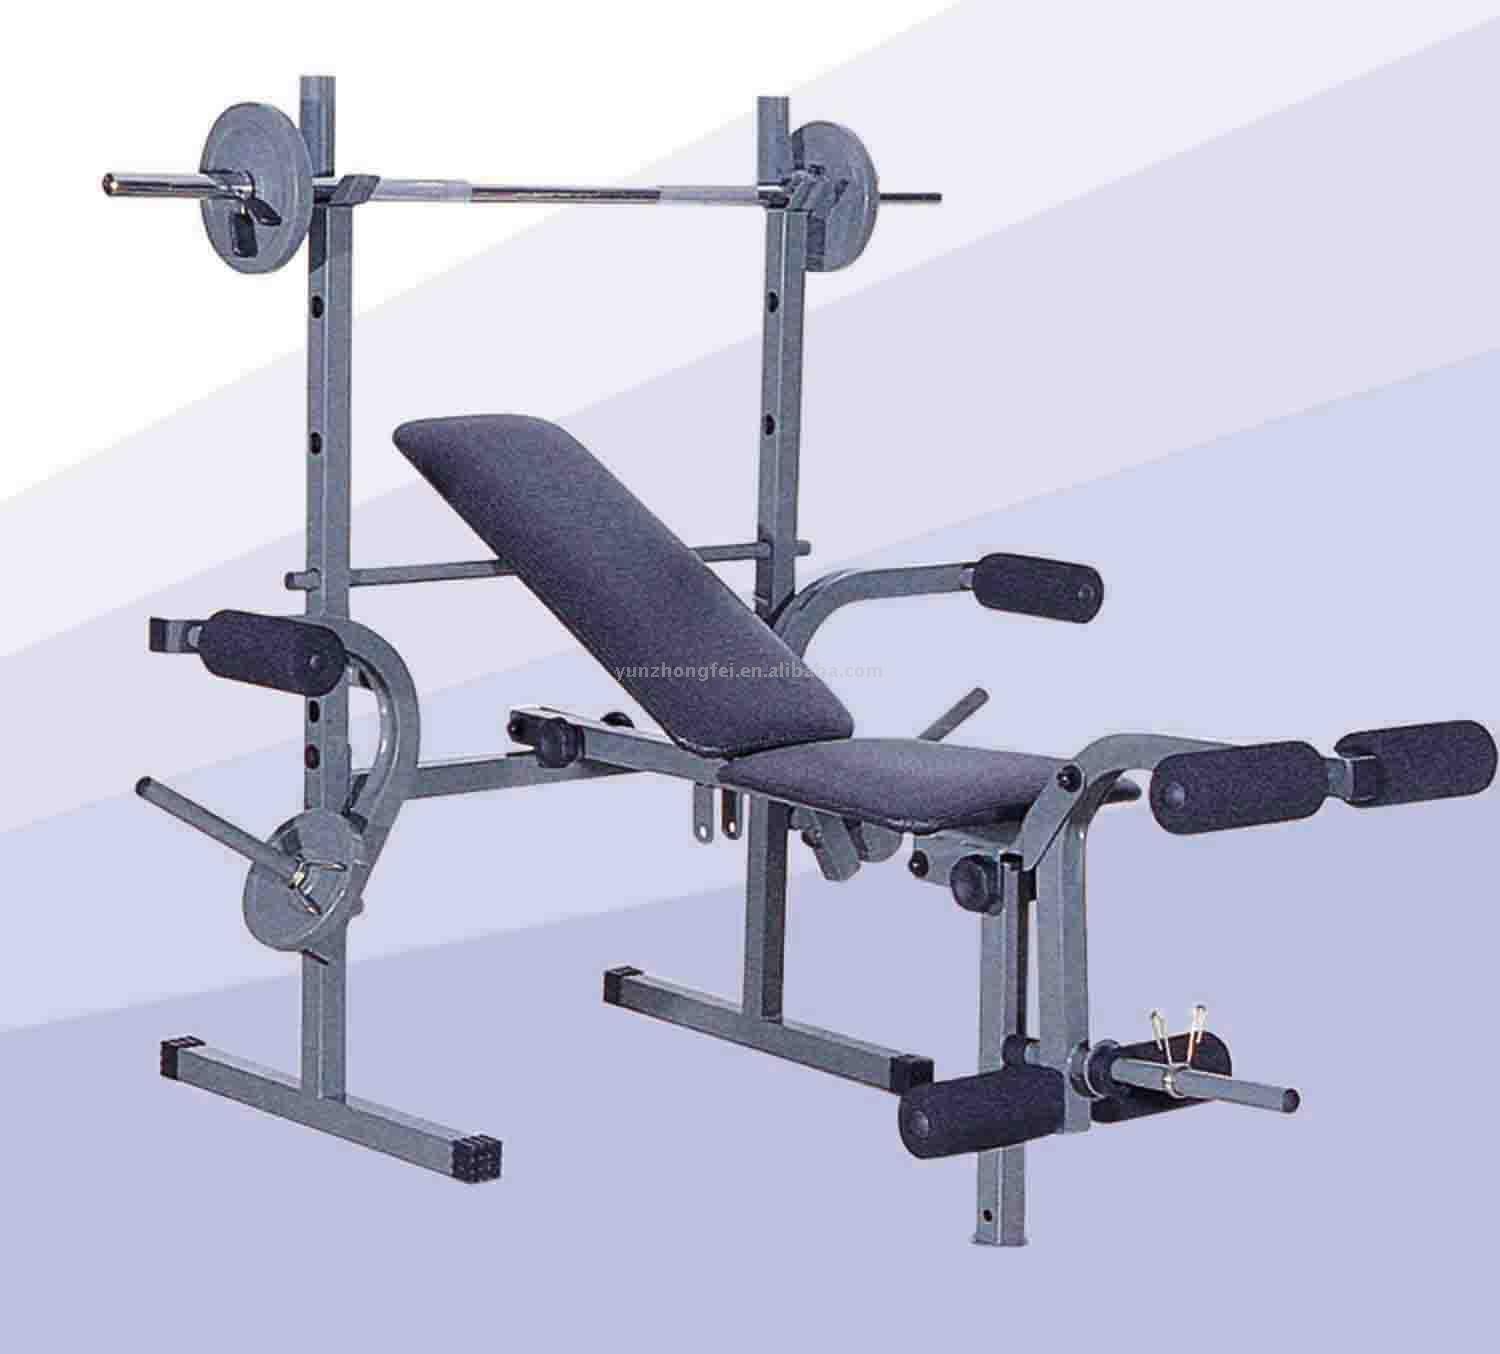 37 Minute Where to buy used weight bench for Workout Everyday